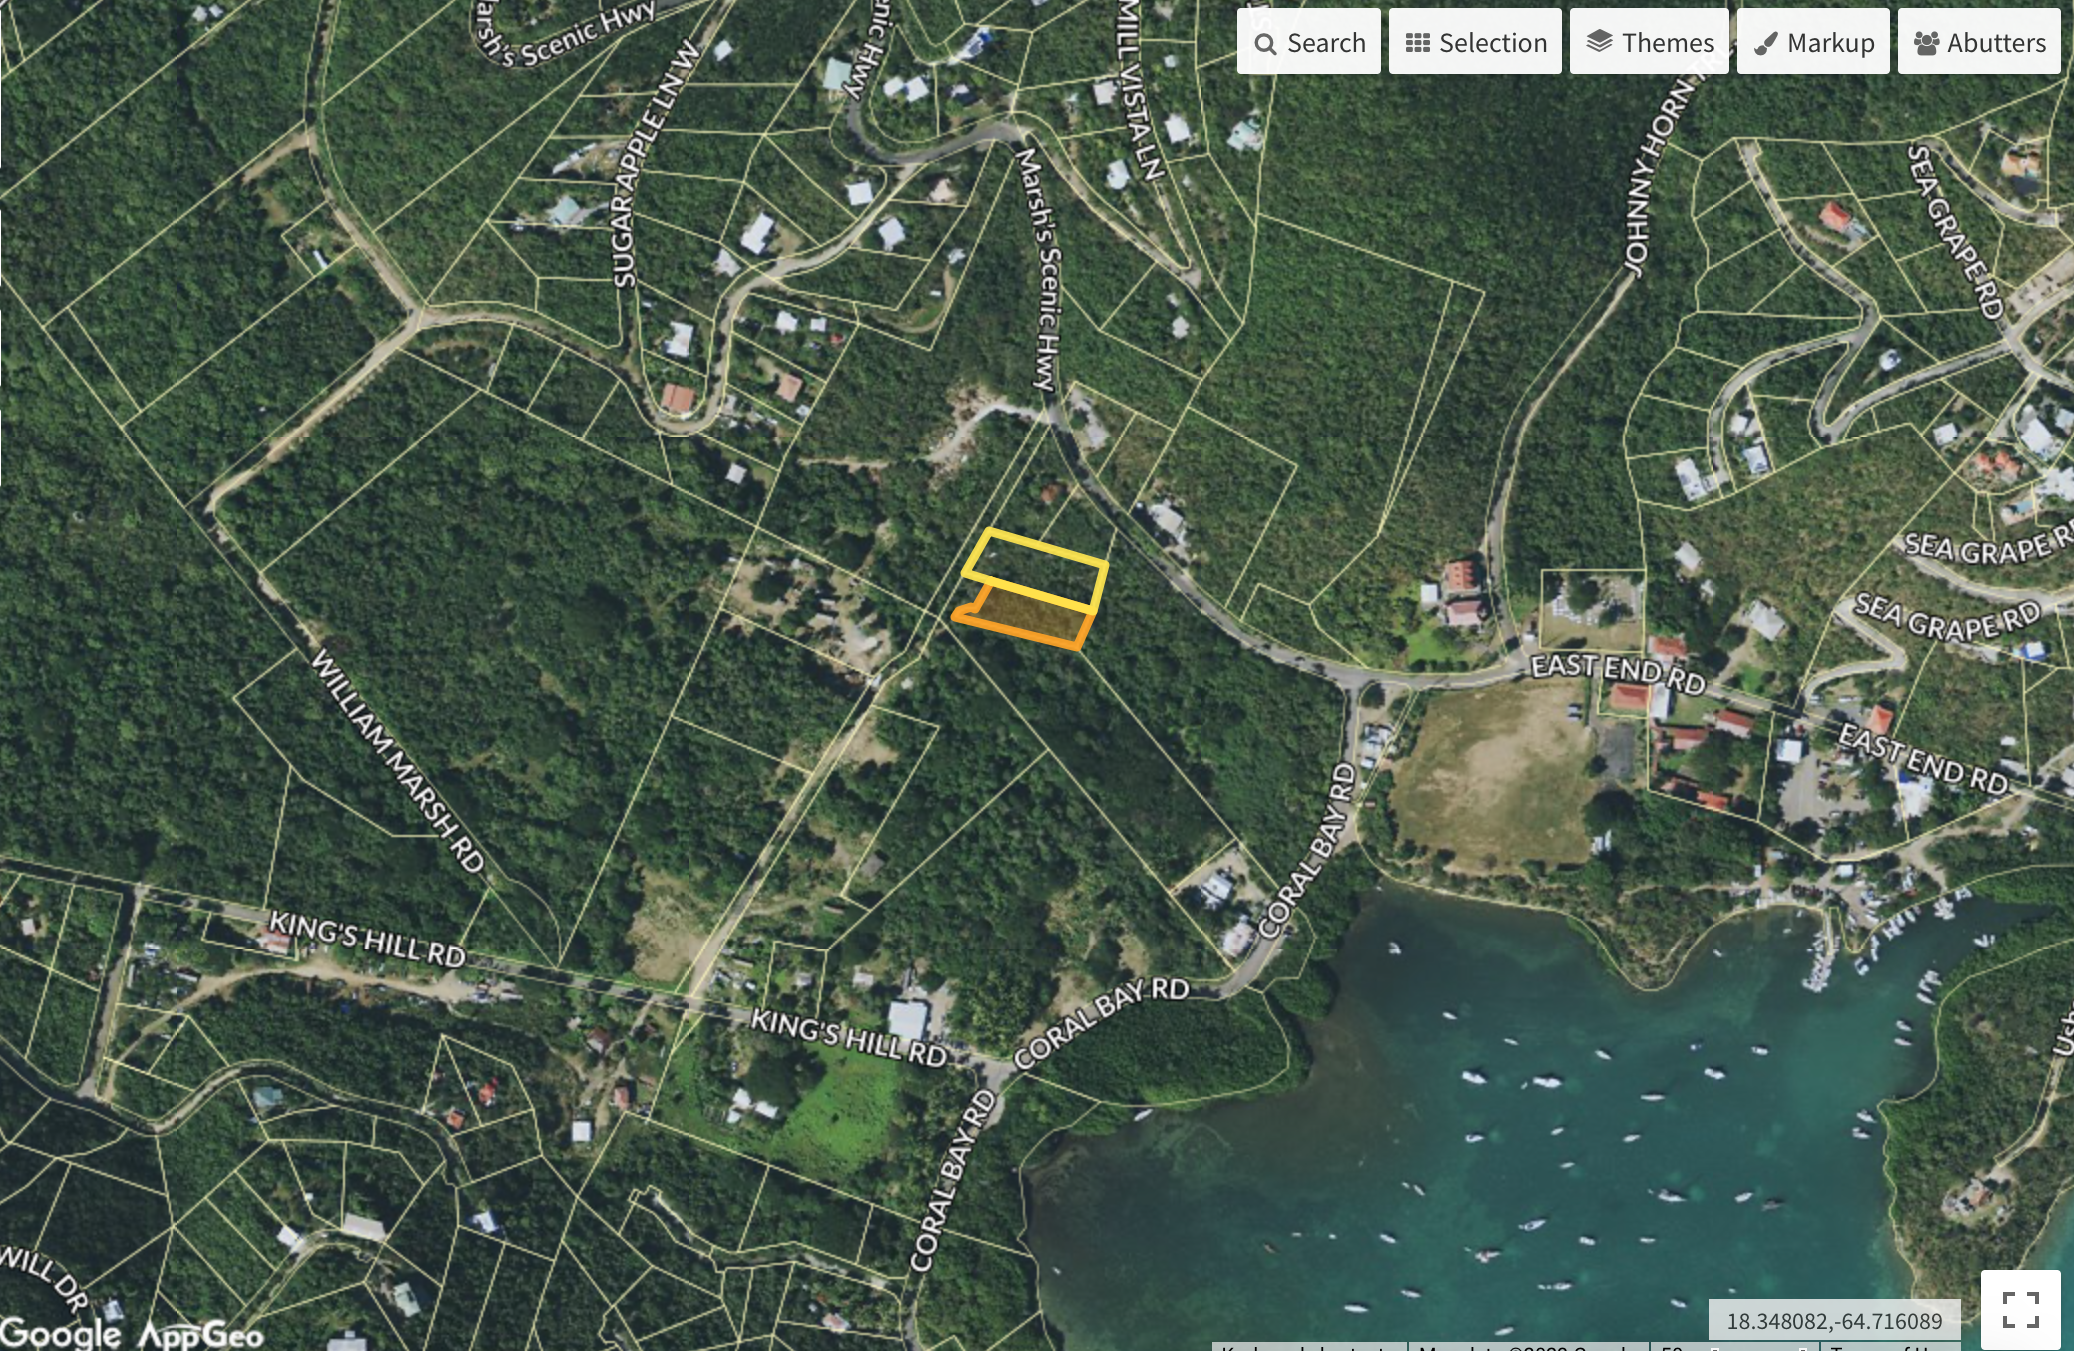 A Map Geo image shows the location (outlined in orange) of Our Place in CoralBay.